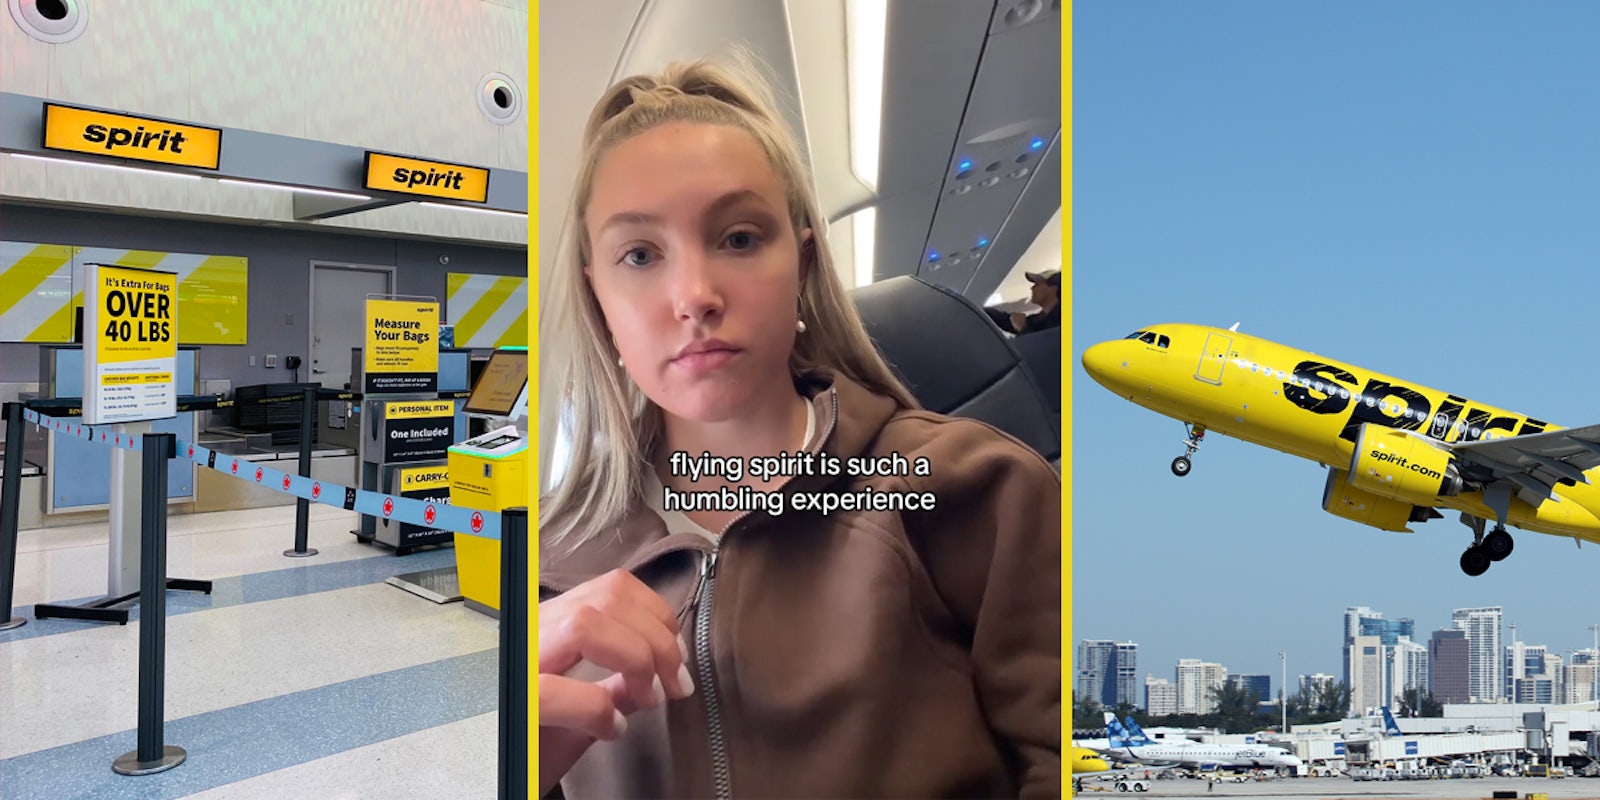 Spirit Airlines line (l) woman in plane with caption 'flying spirit is such a humbling experience' (c) Spirit plane (r)